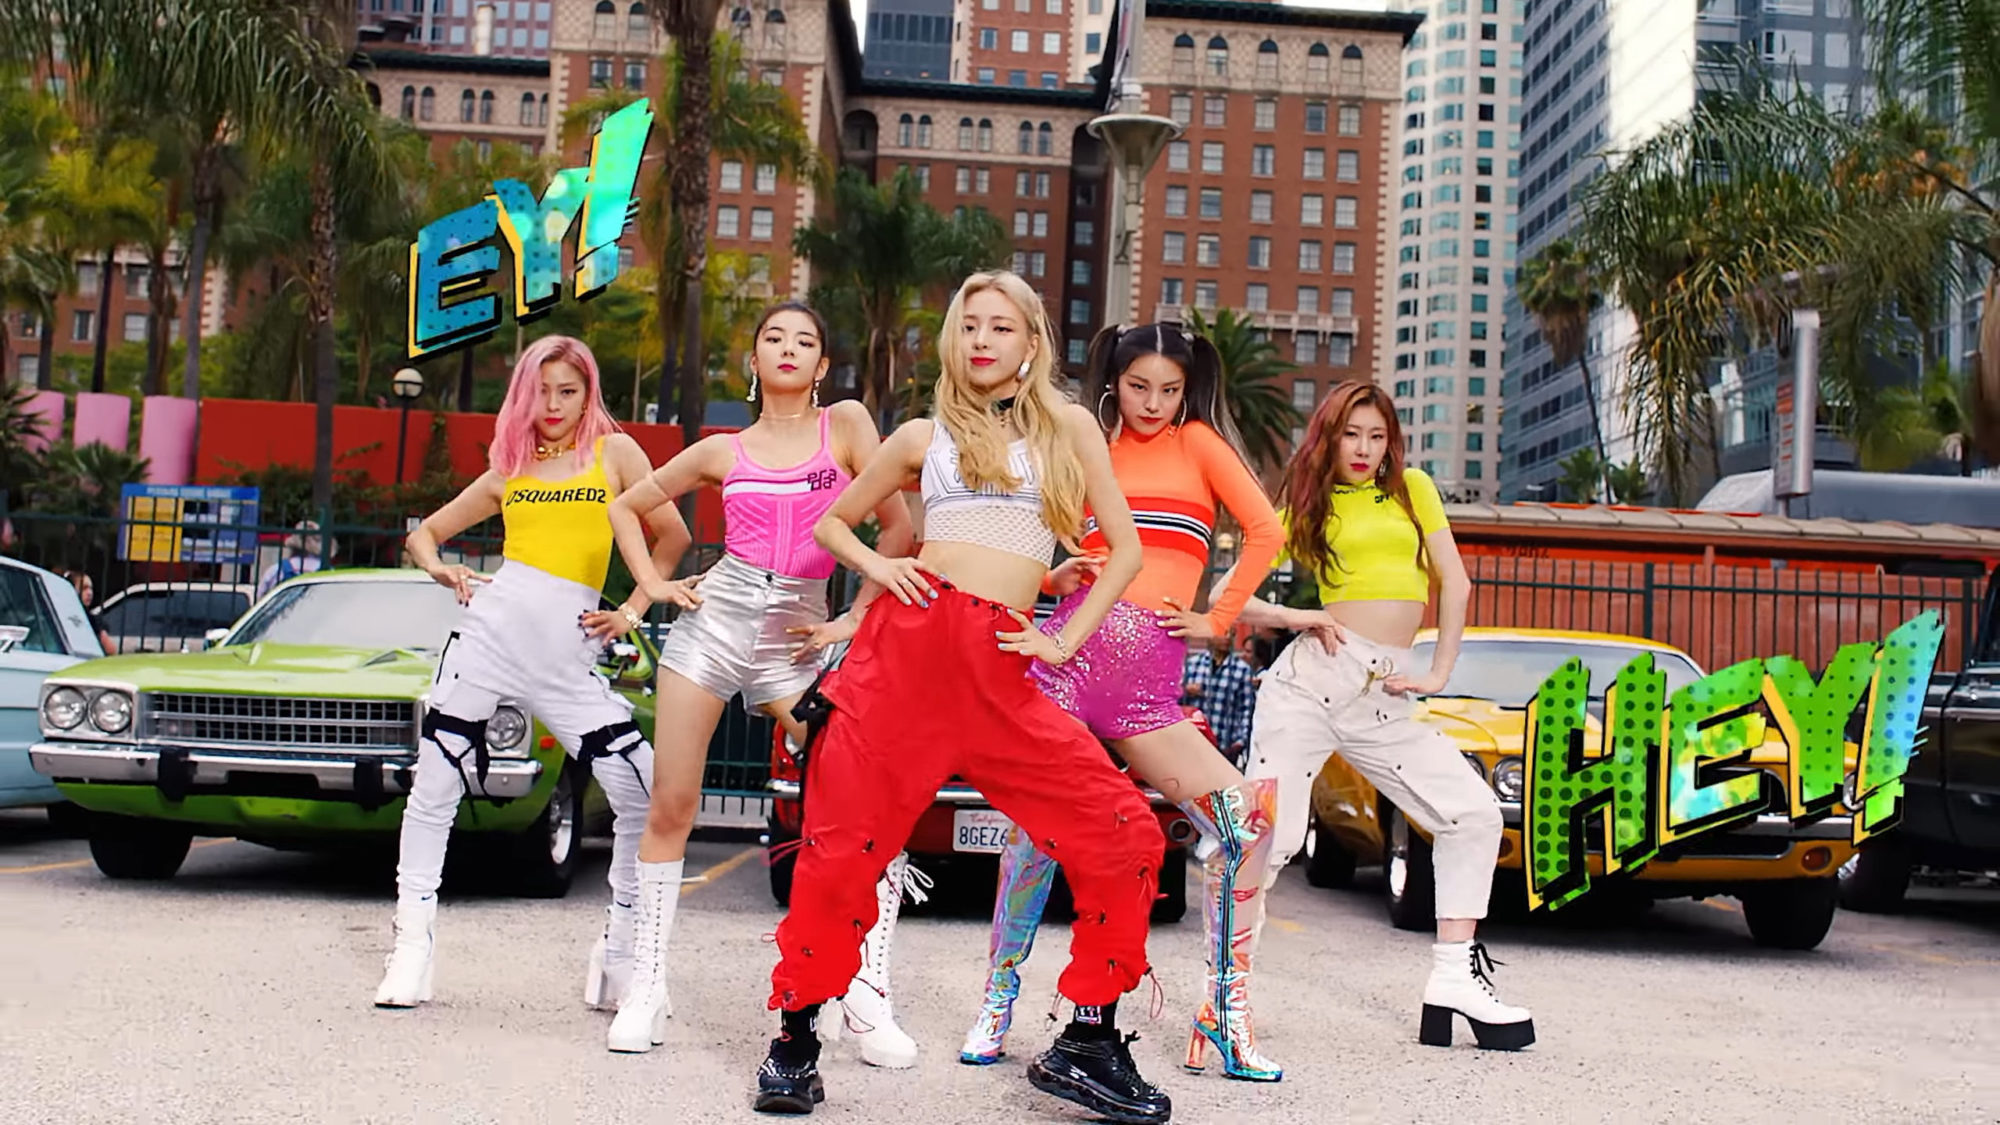 ITZY - ICY who's who - K-Pop Database / dbkpop.com